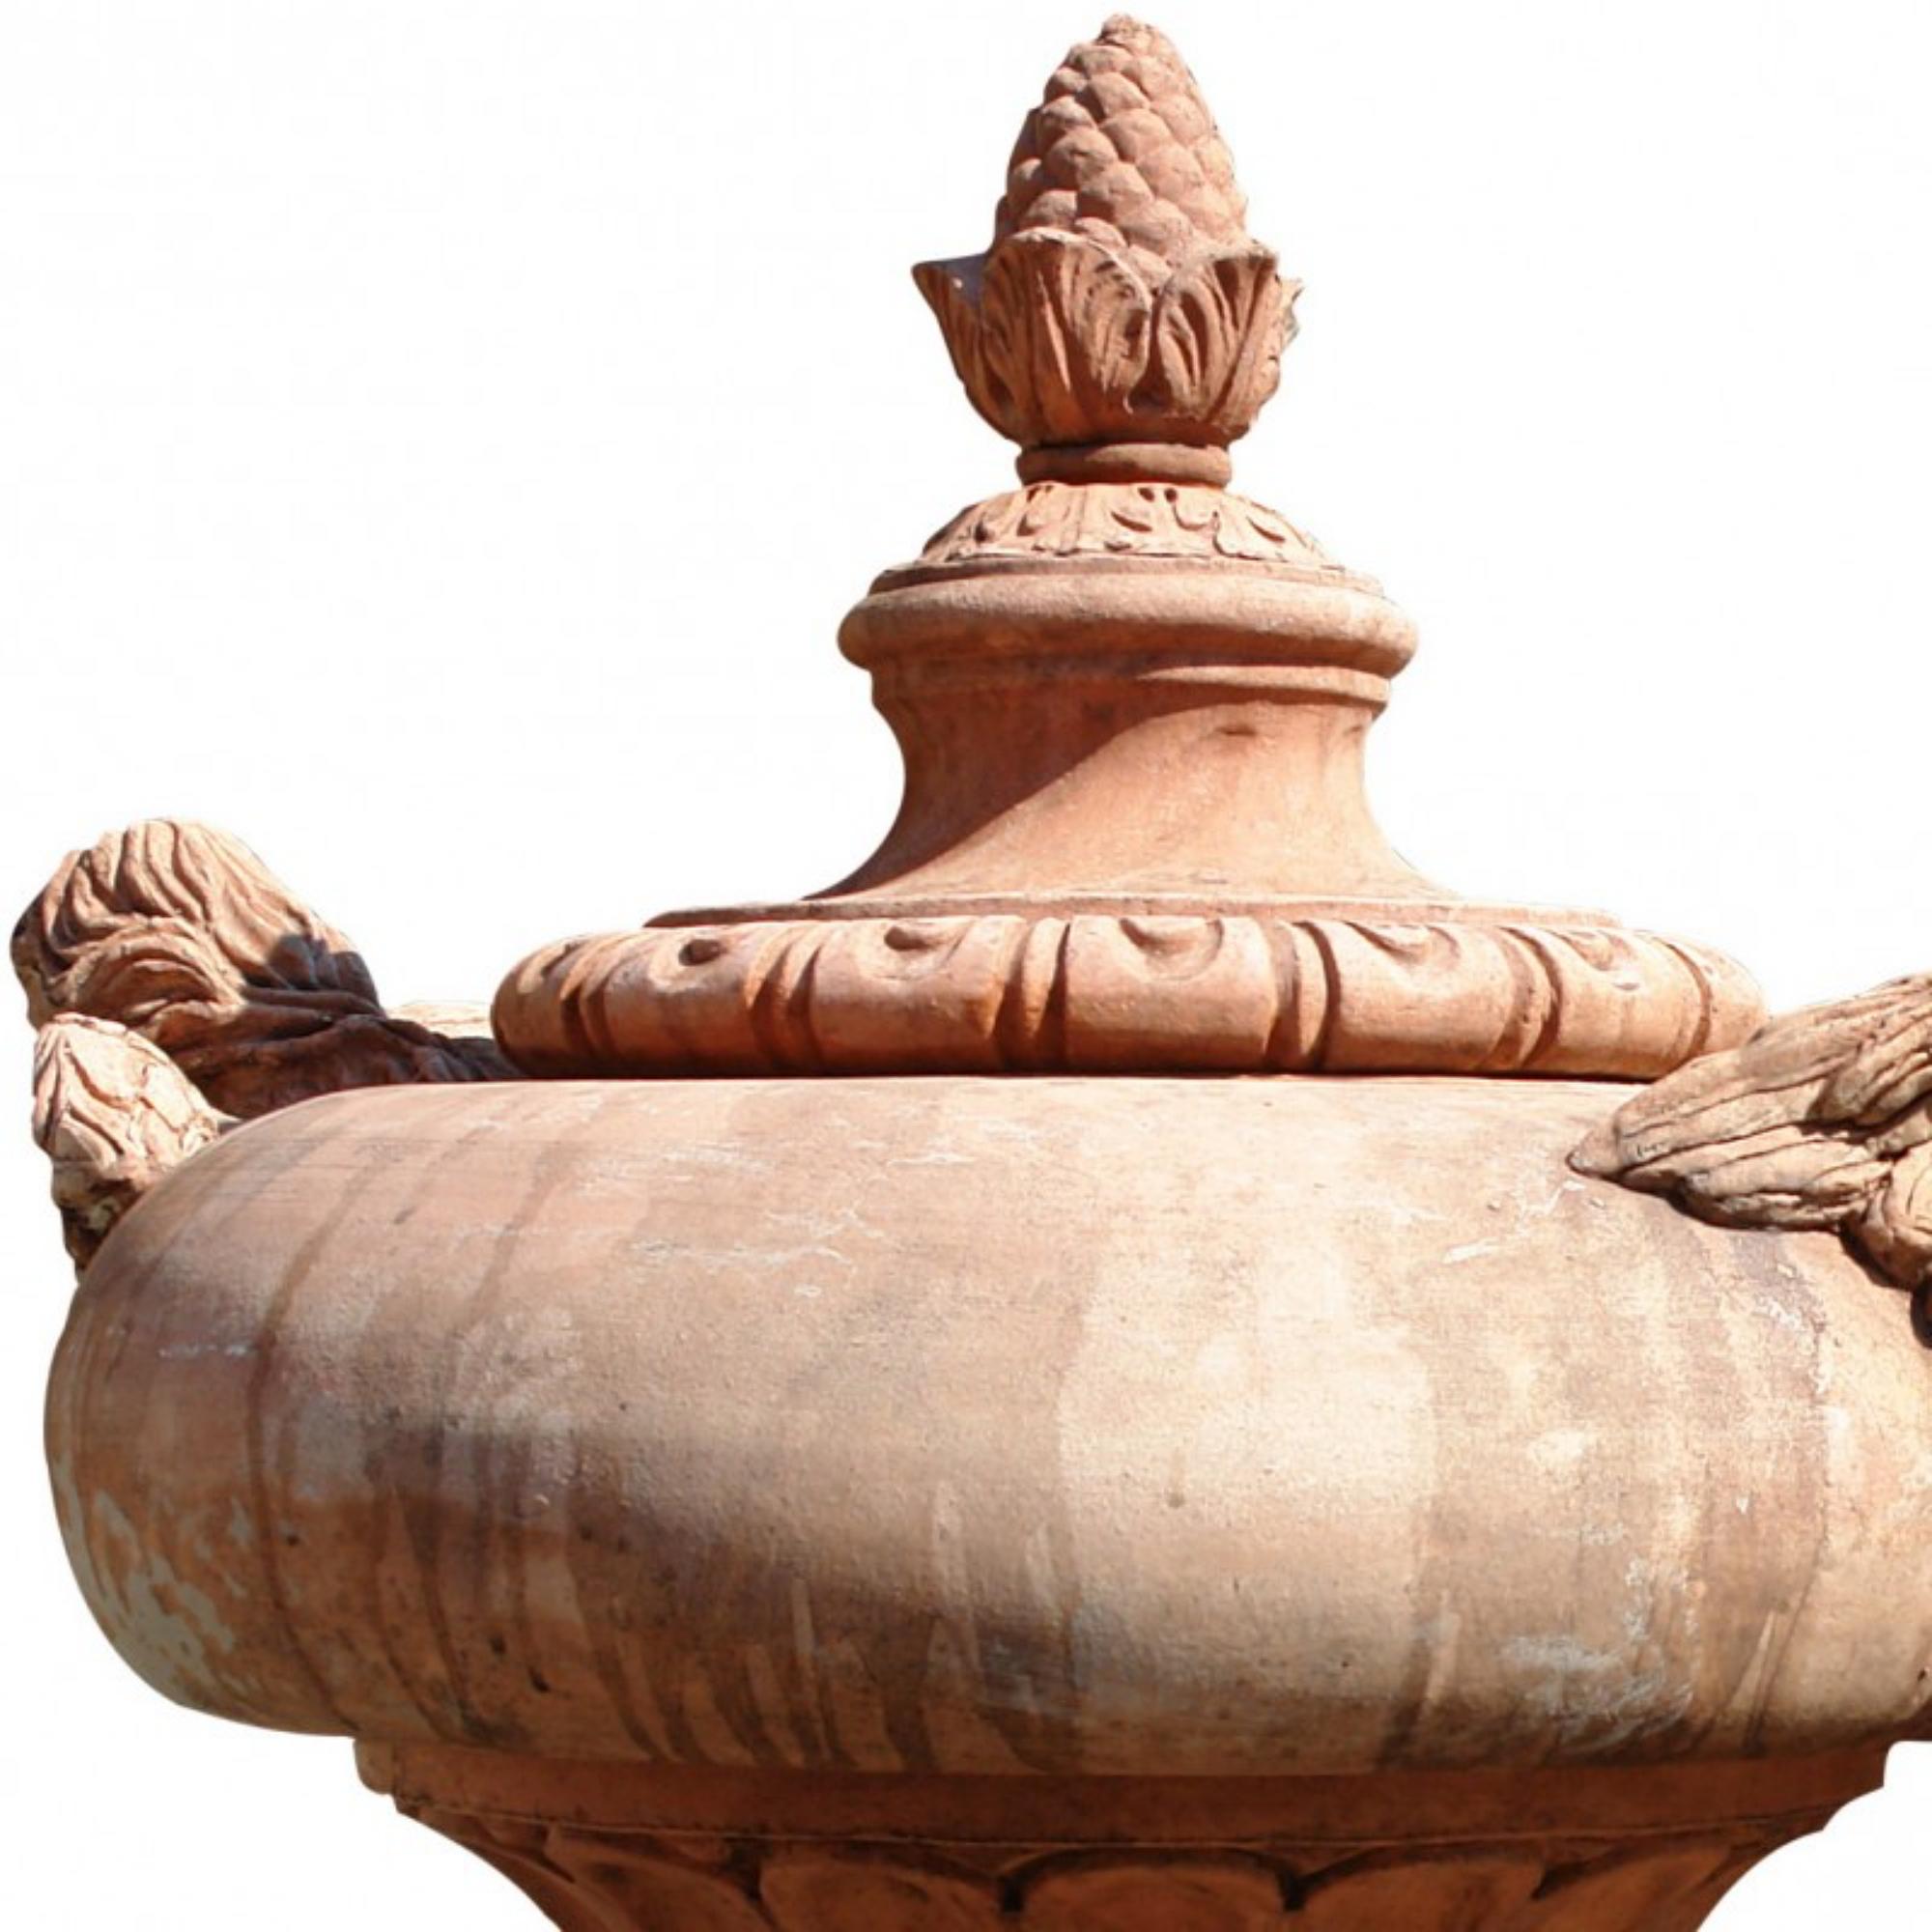 Hand-Crafted Large Pillar Vase with Angels Front Terracotta, Early 20th Century For Sale